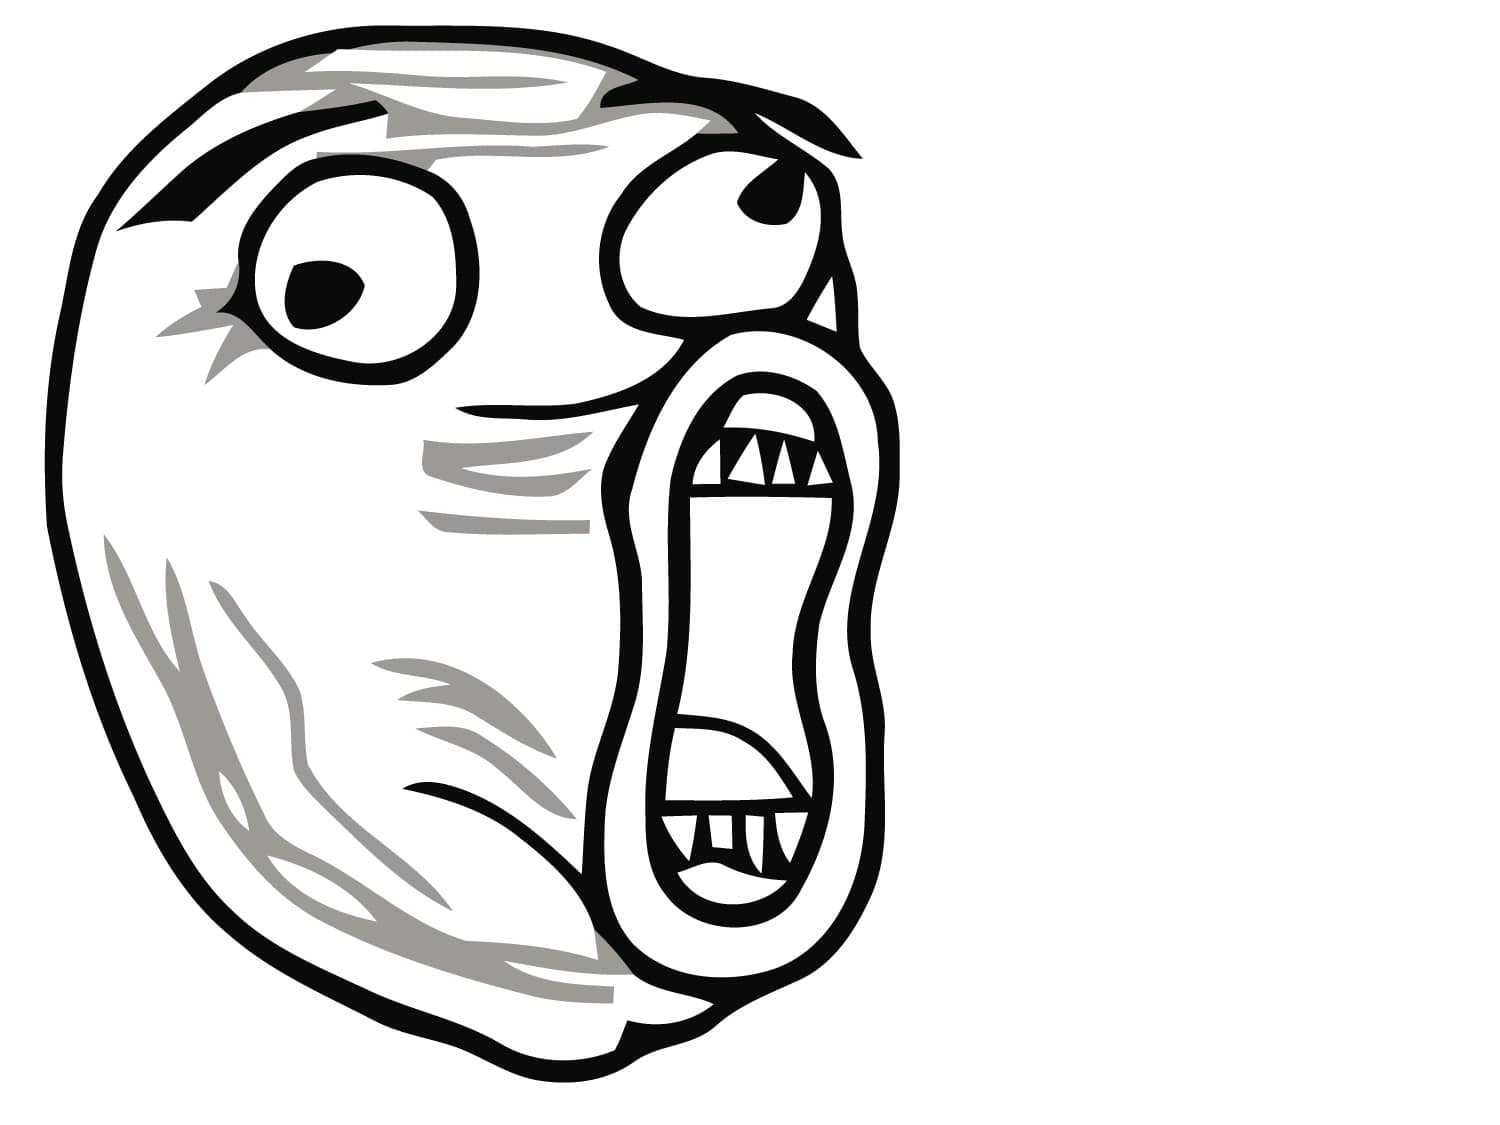 Only the real will relate - Funny  Rage faces, Rage meme, Rage comics